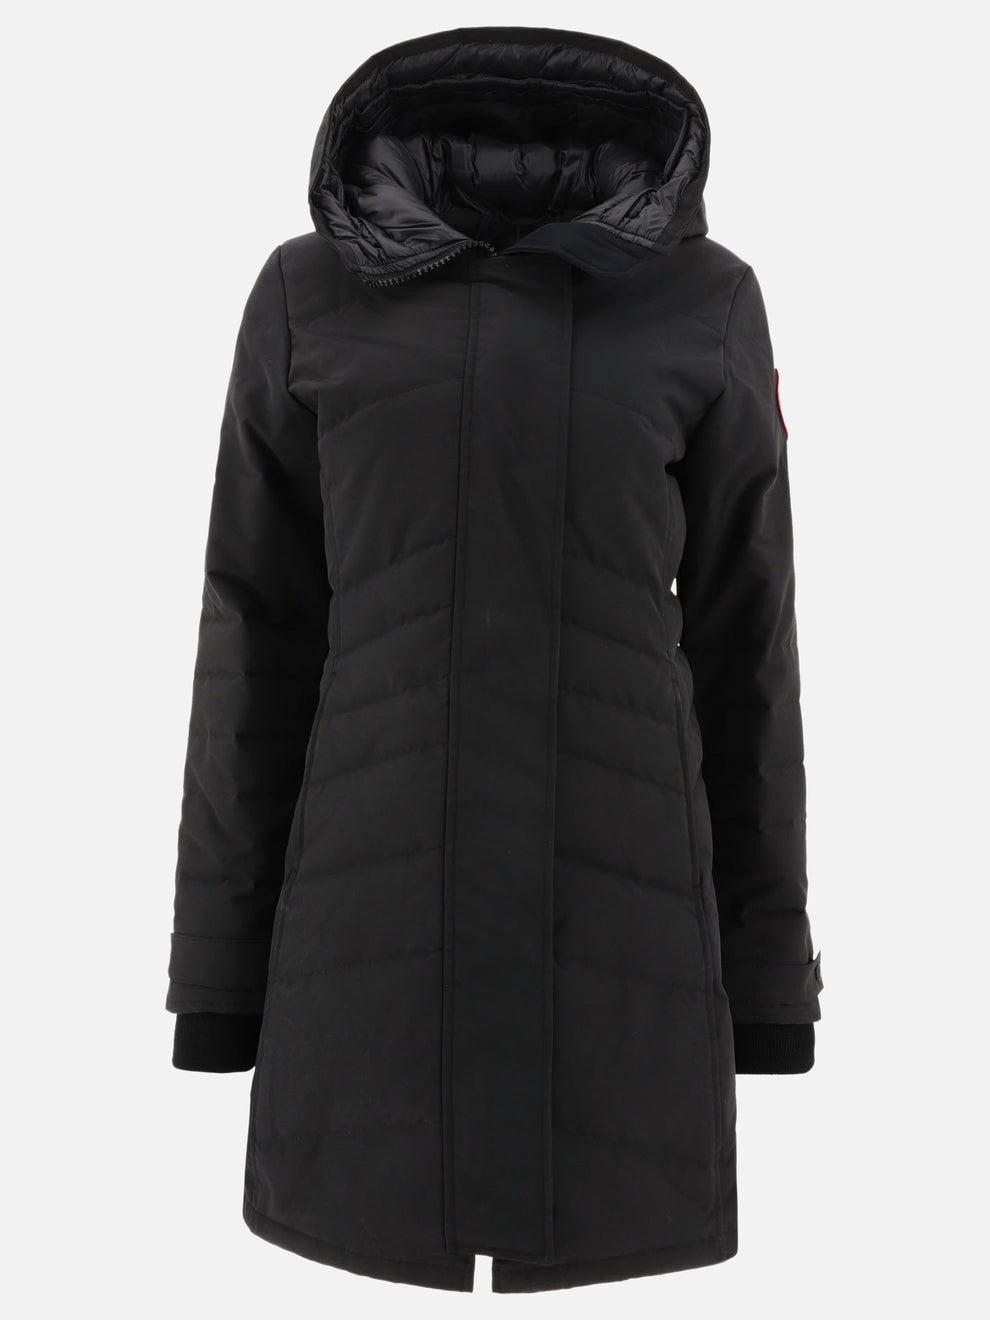 CANADA GOOSE Black Lorette Parka Jacket for Women - Stay Warm and Stylish in This Versatile Winter Jacket